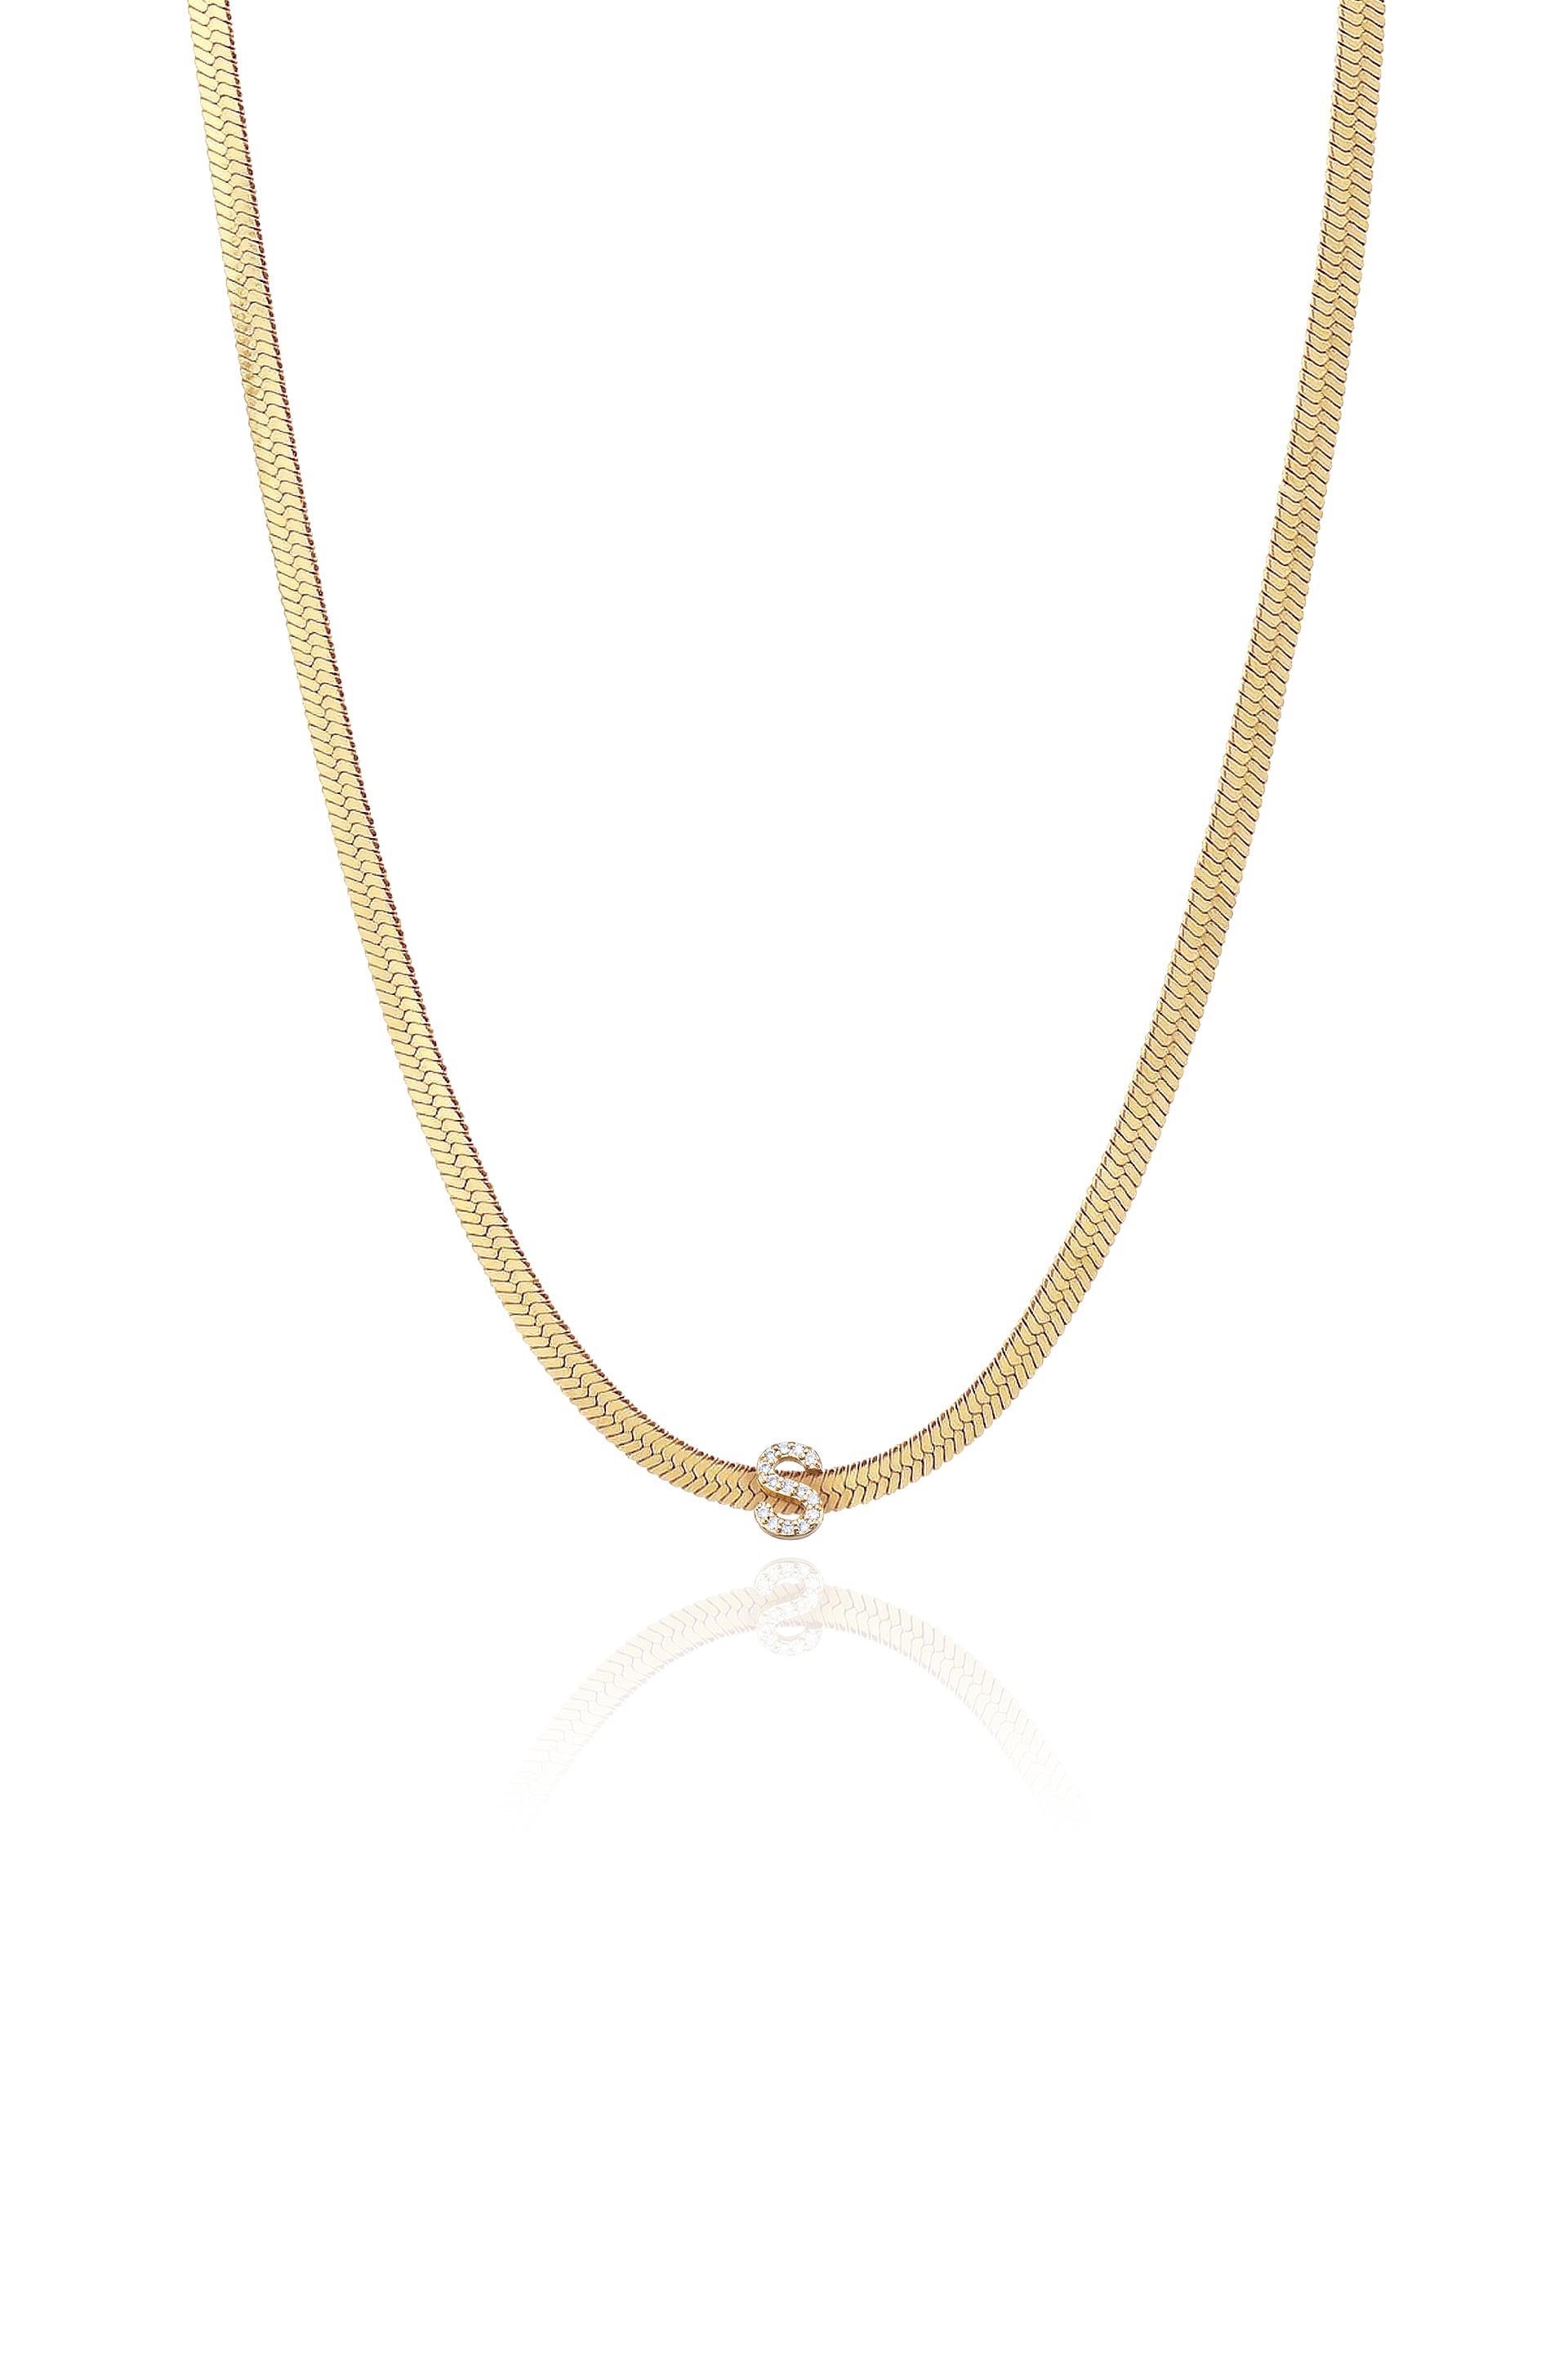 Omega Chokers Pearl Necklace. Gold Necklace, 18ct Gold Vermeil Necklace,  Omega Necklace, Diamond Necklace, - Etsy